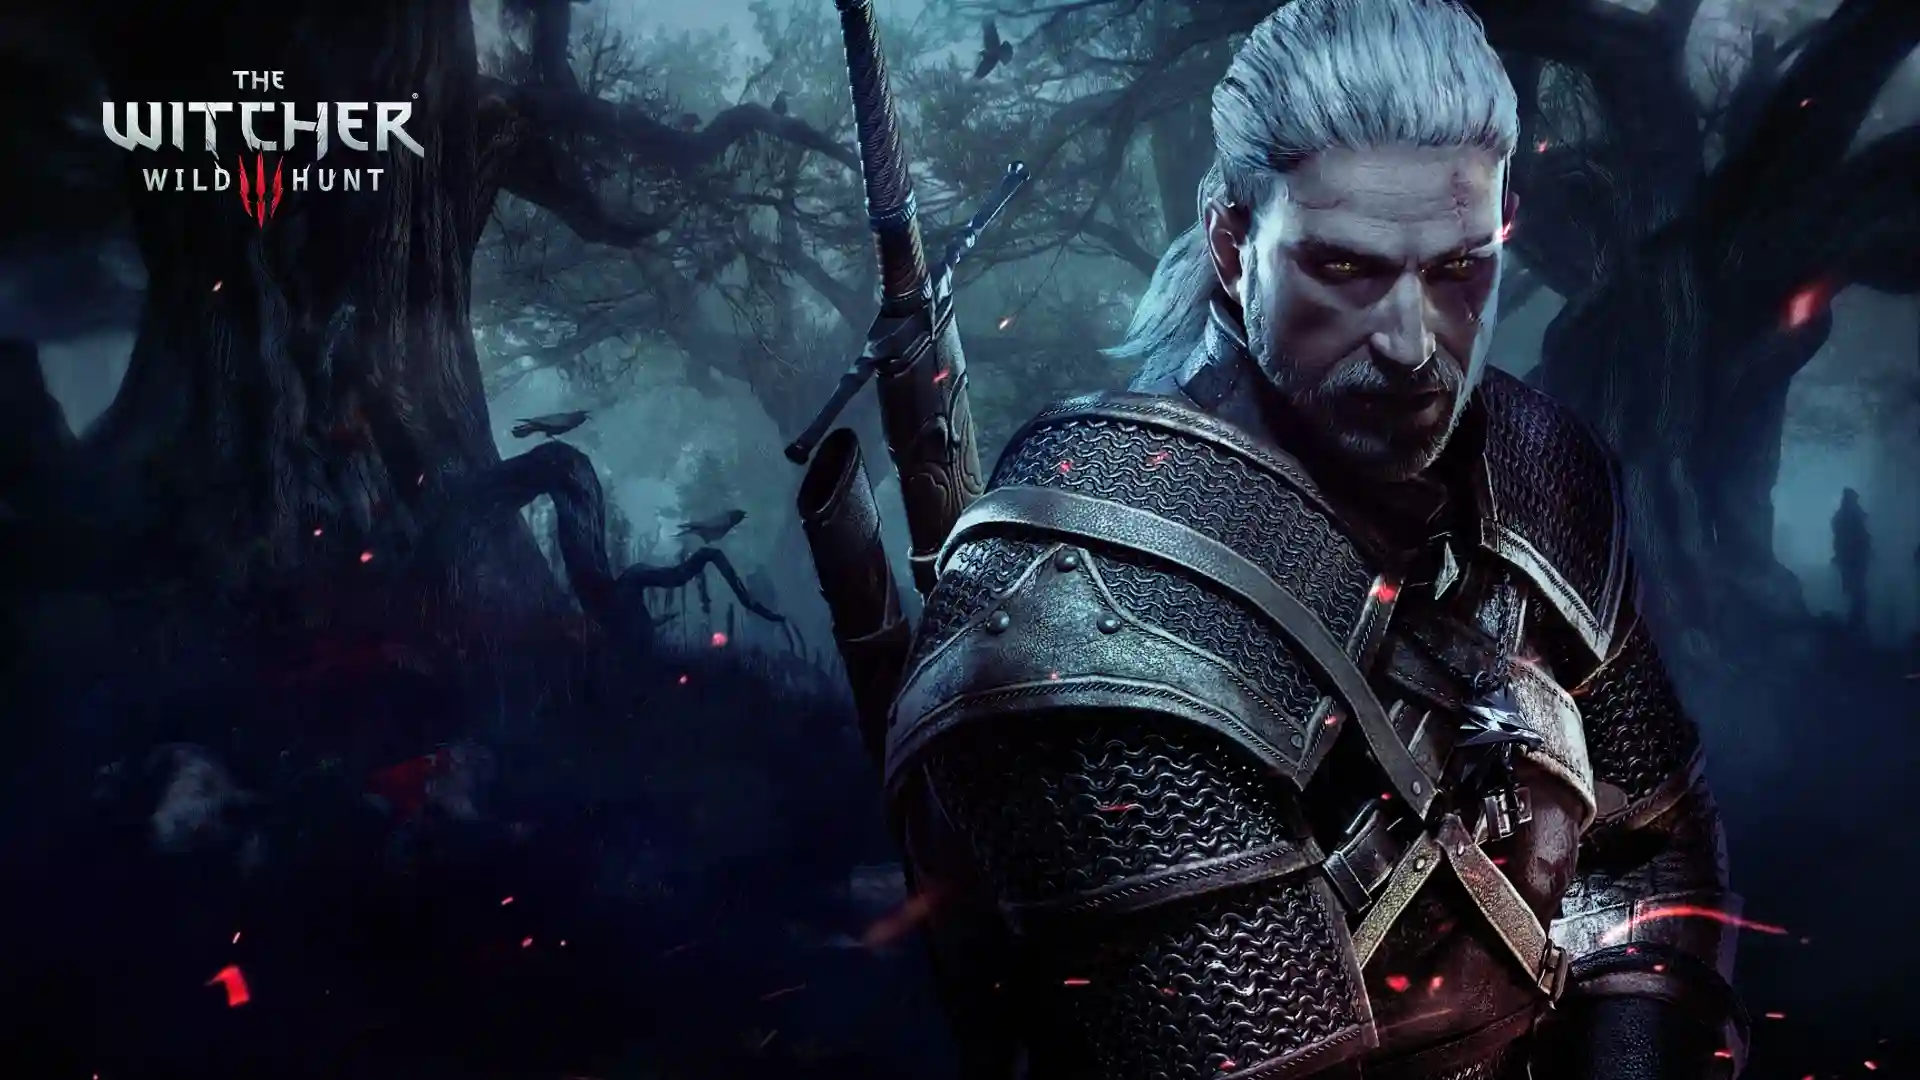 The Witcher 3: CD Projekt Revenue Increased By 70%